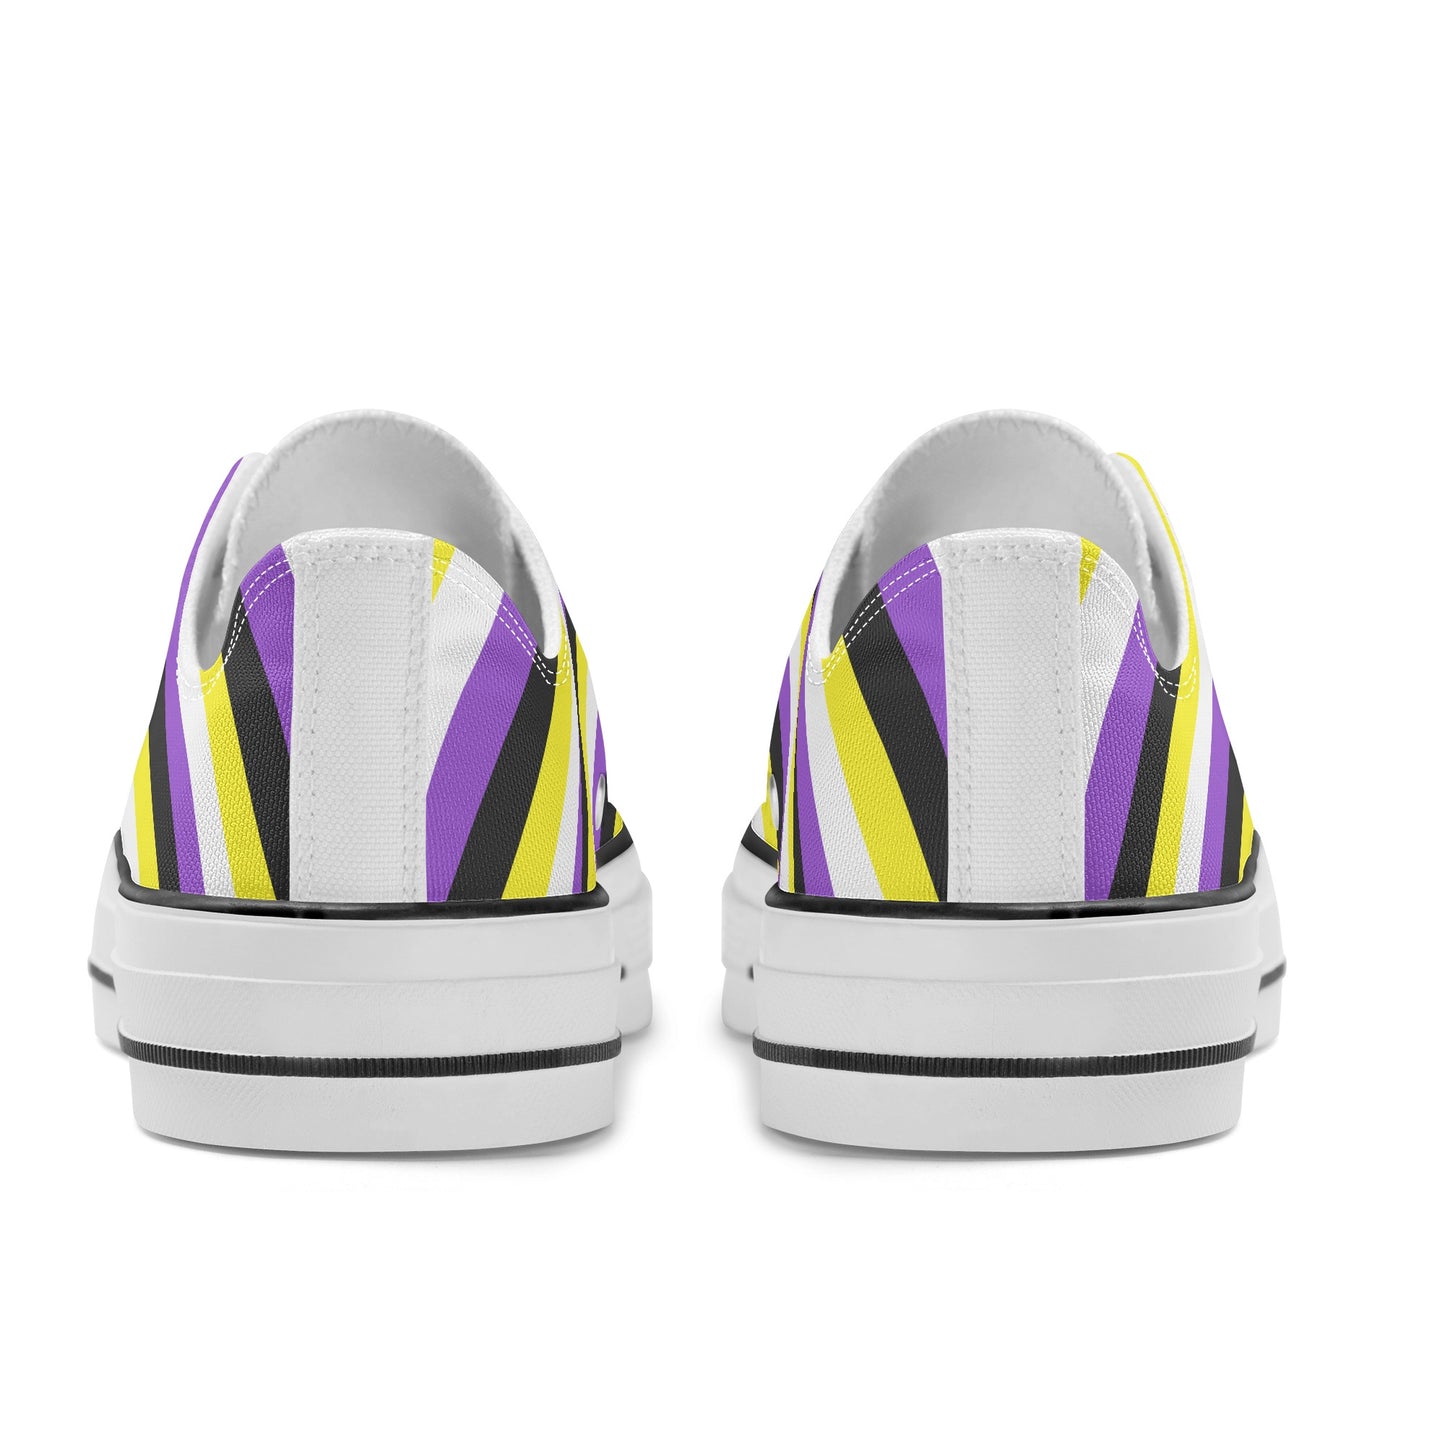 Nonbinary Pride Collection - Mens Classic Low Top Canvas Shoes for the LGBTQIA+ community